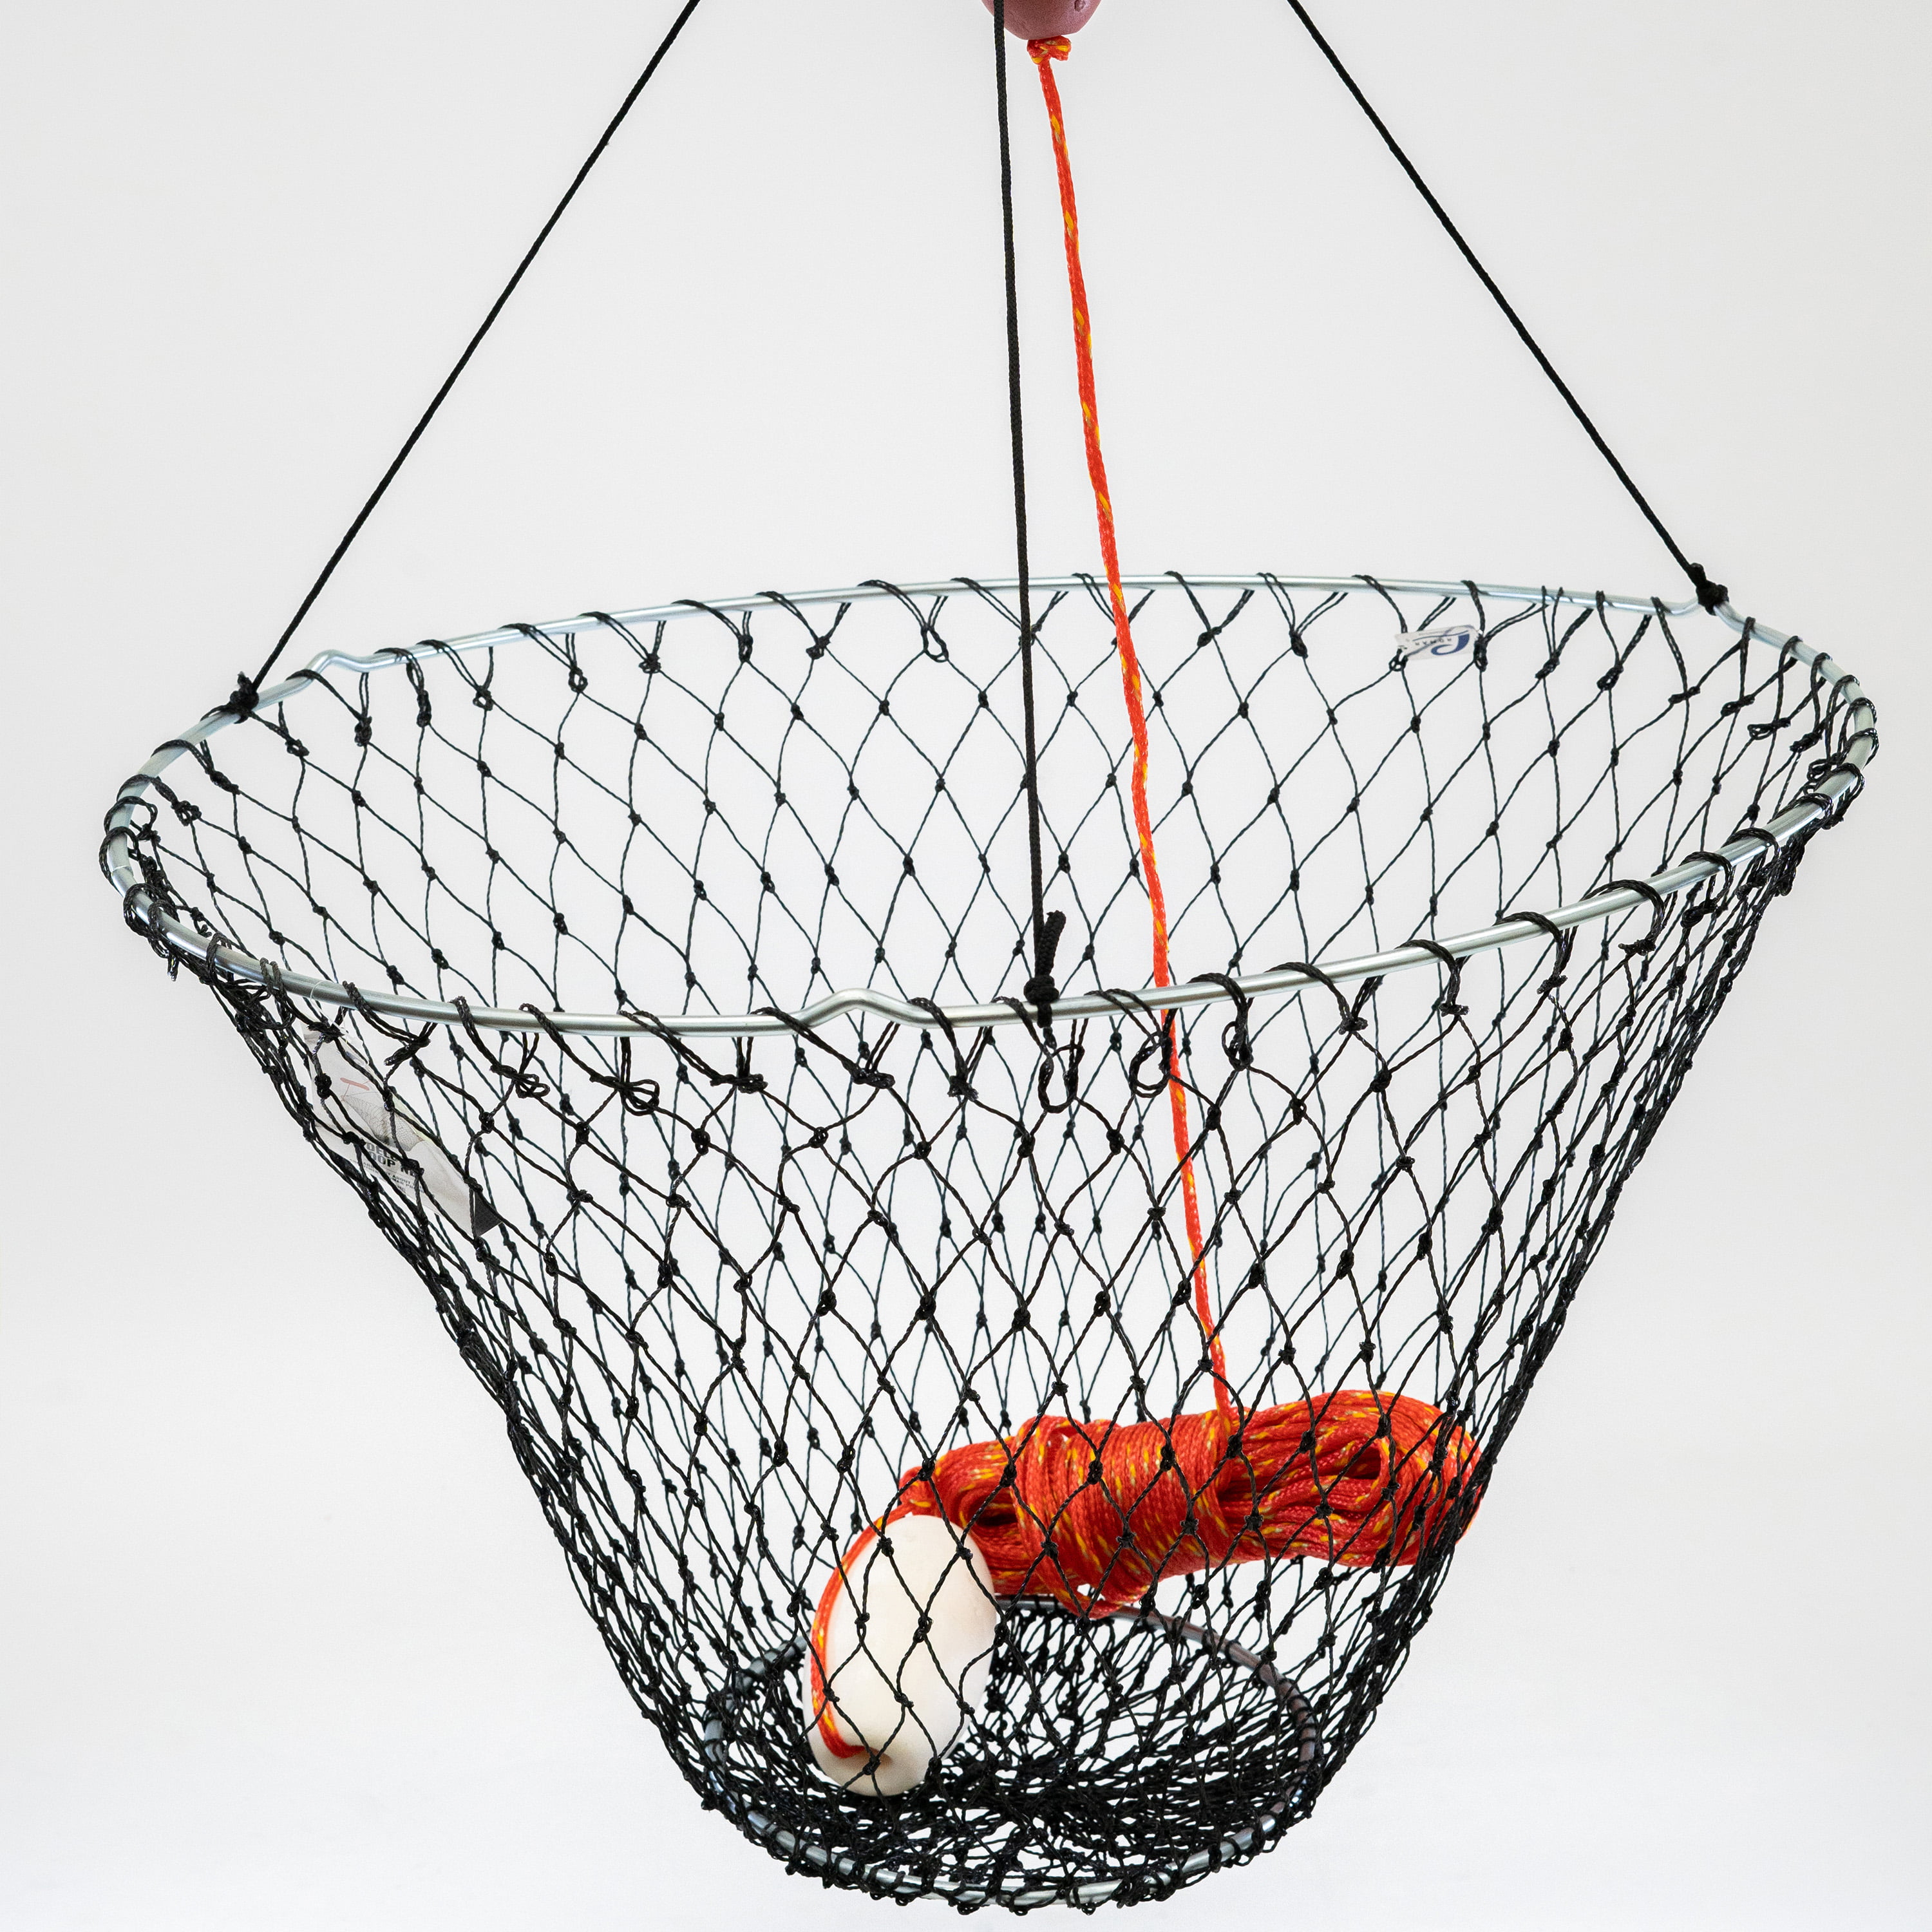 Promar 32 Deluxe Lobster and Crab Fishing Net 